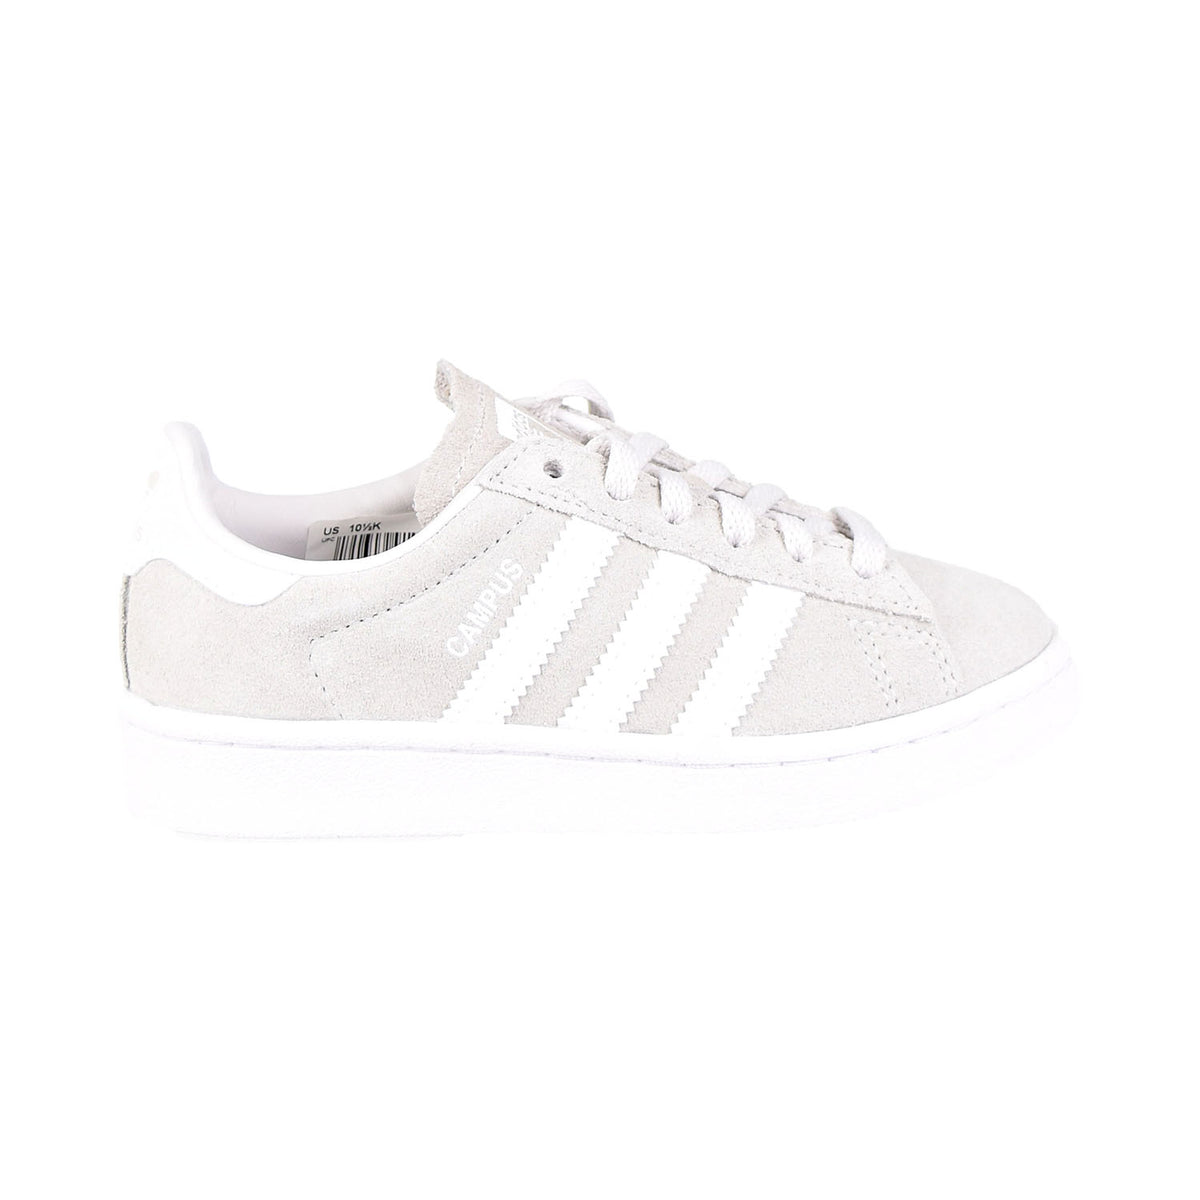 Adidas Little Kids Shoes Grey/White